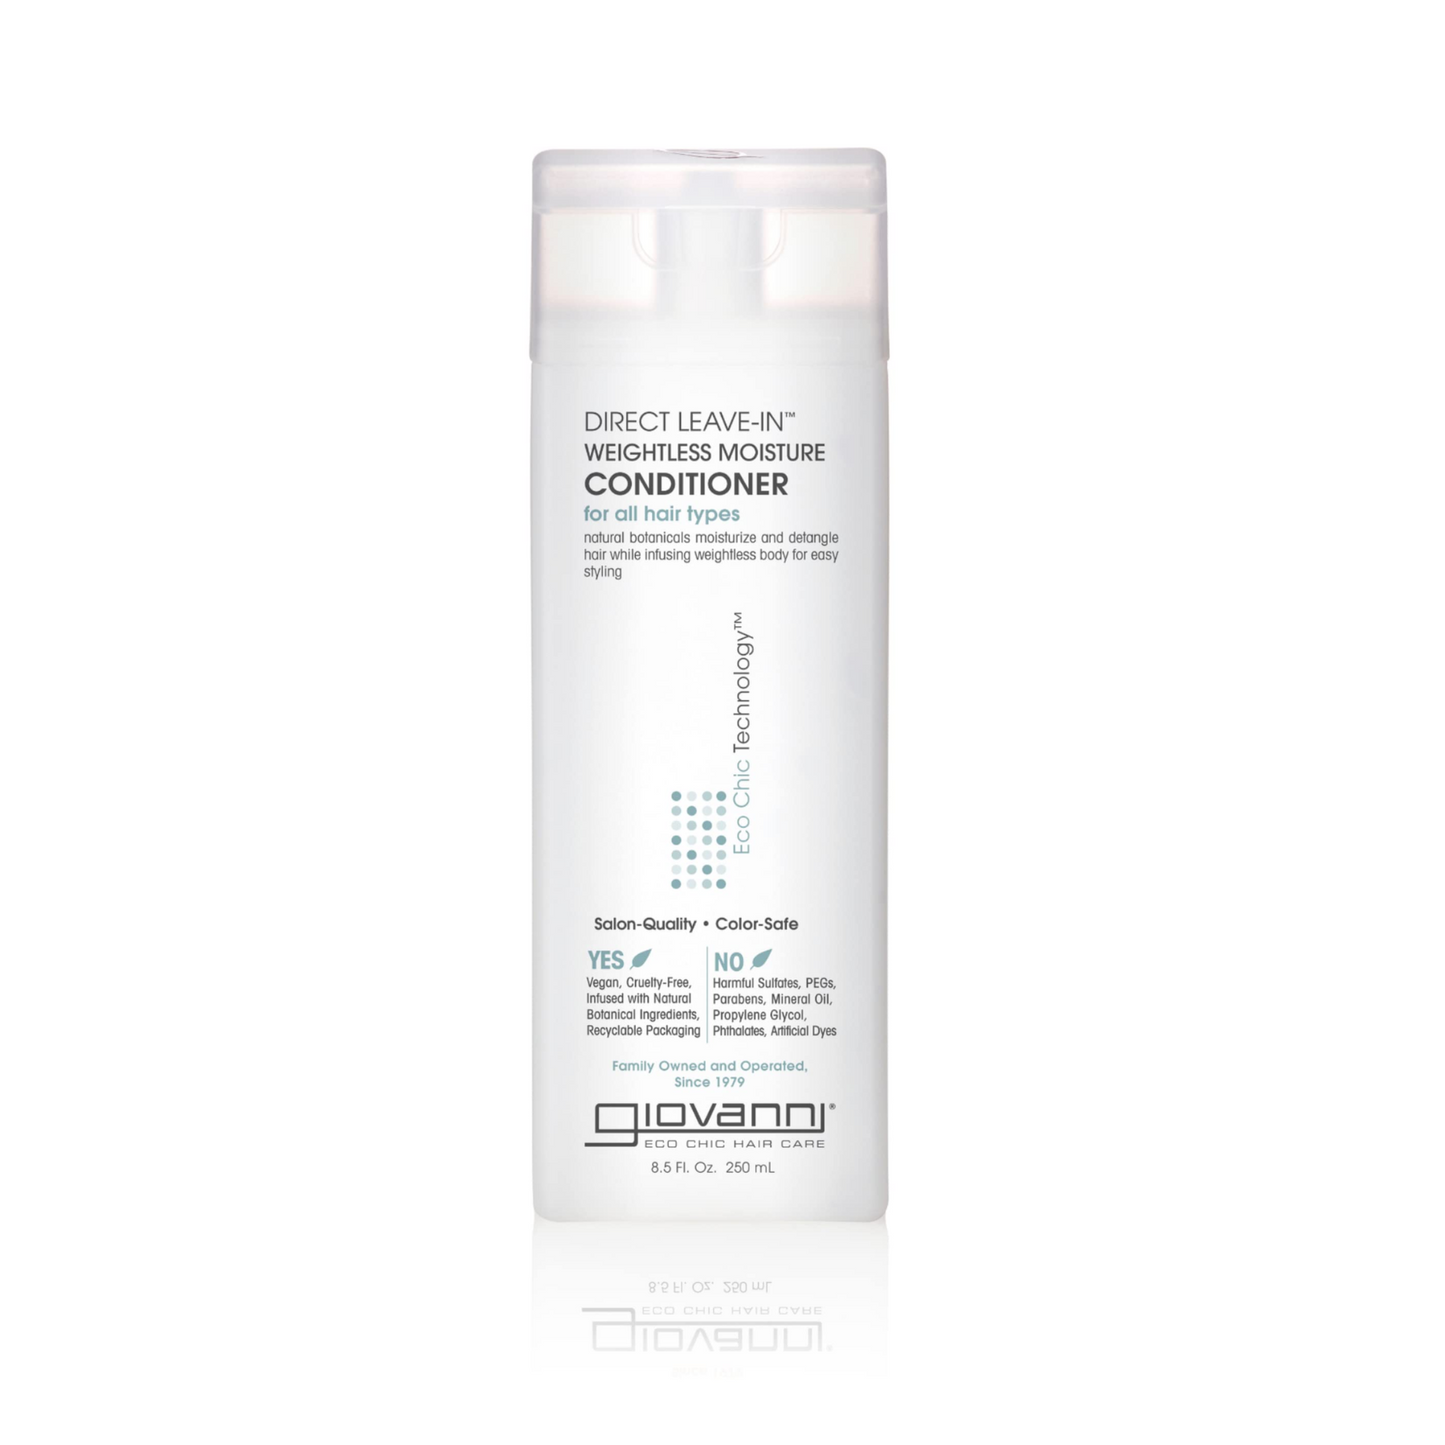 Giovanni Direct Leave-In Weightless Moisture Conditioner 250ml, Moisturises & Builds Body